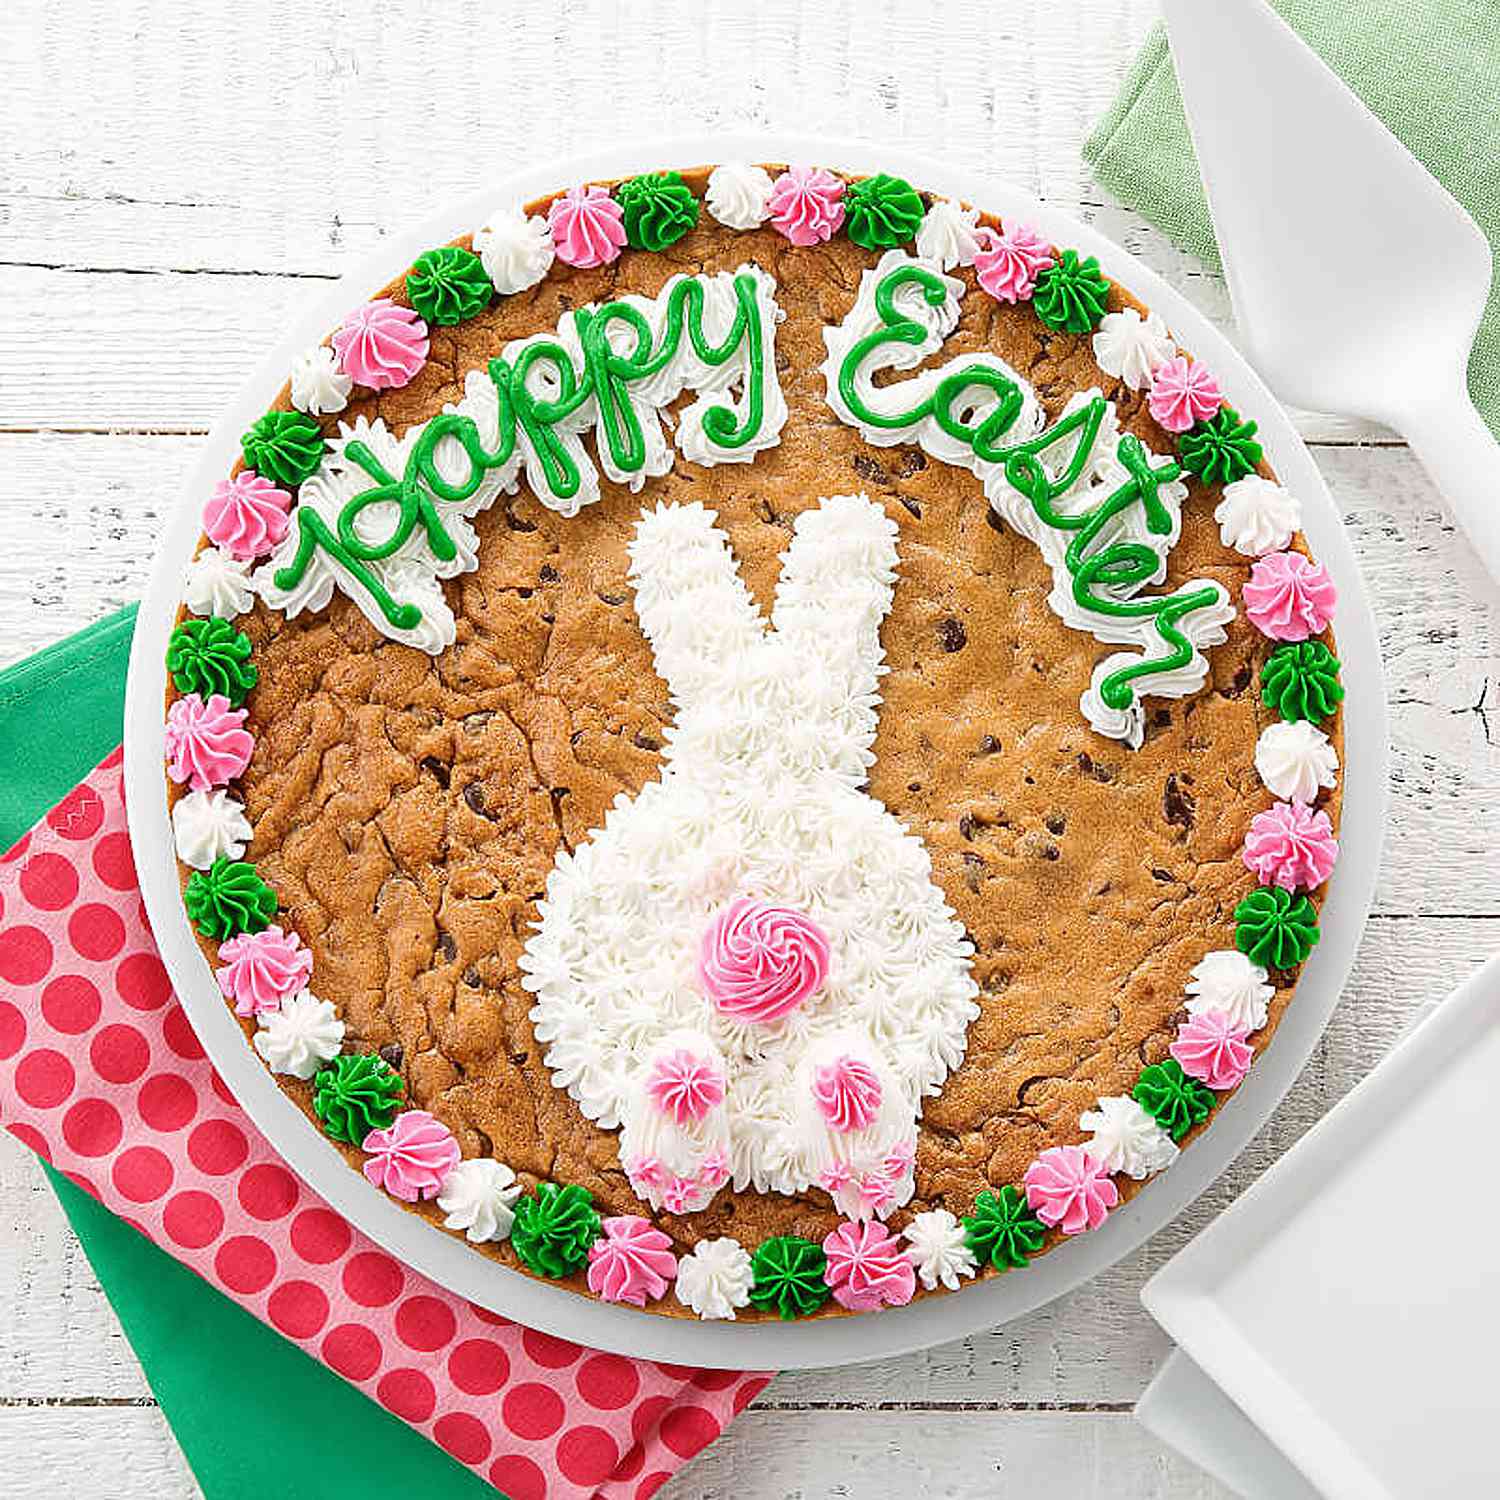 Bunny Tail Cookie Cake